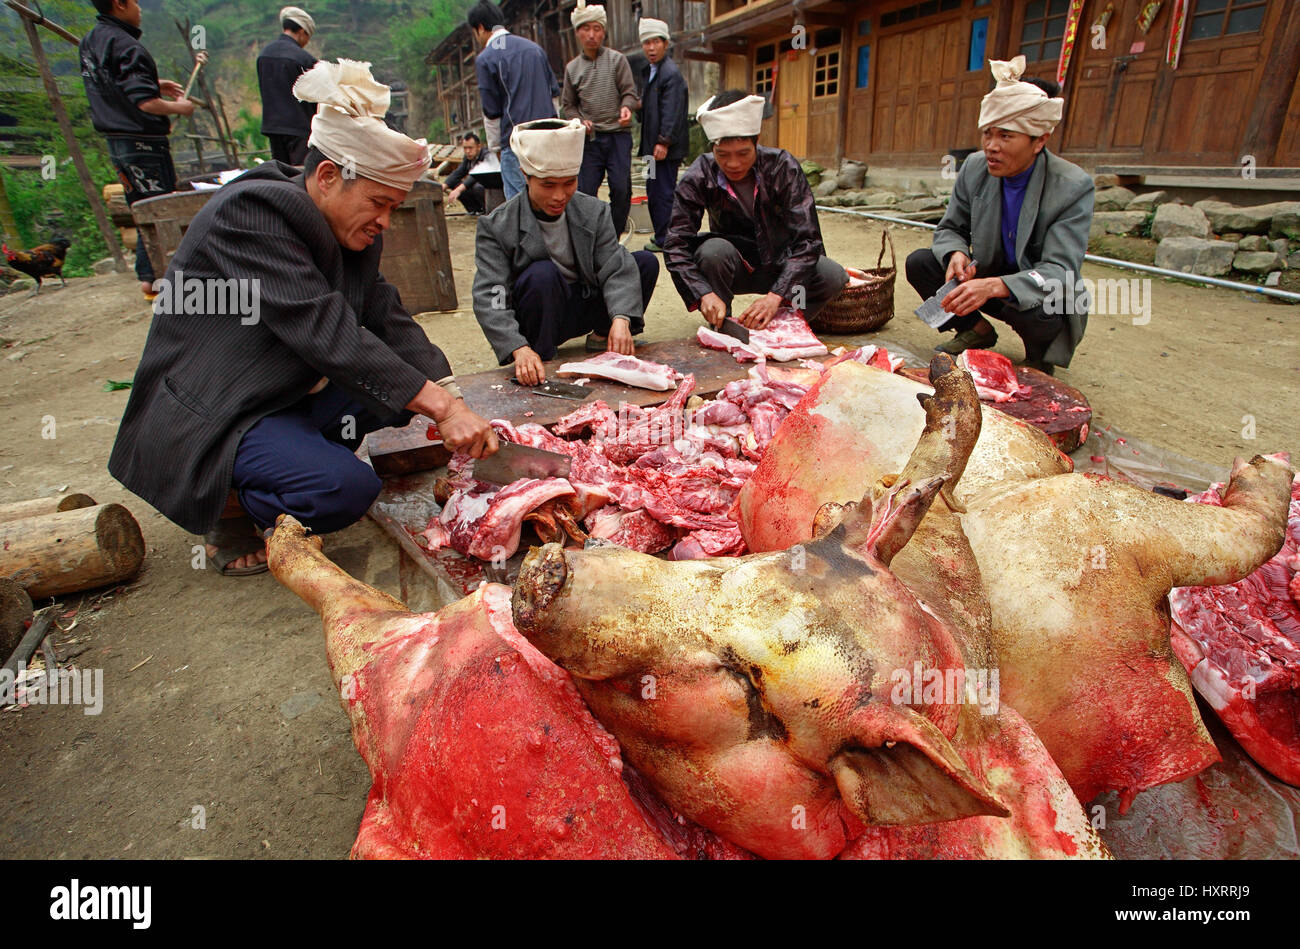 Zengchong village, Guizhou, China - April 12, 2010: Asian farmers are pig producers, butchered pig carcasses on the road, in the Chinese village of et Stock Photo